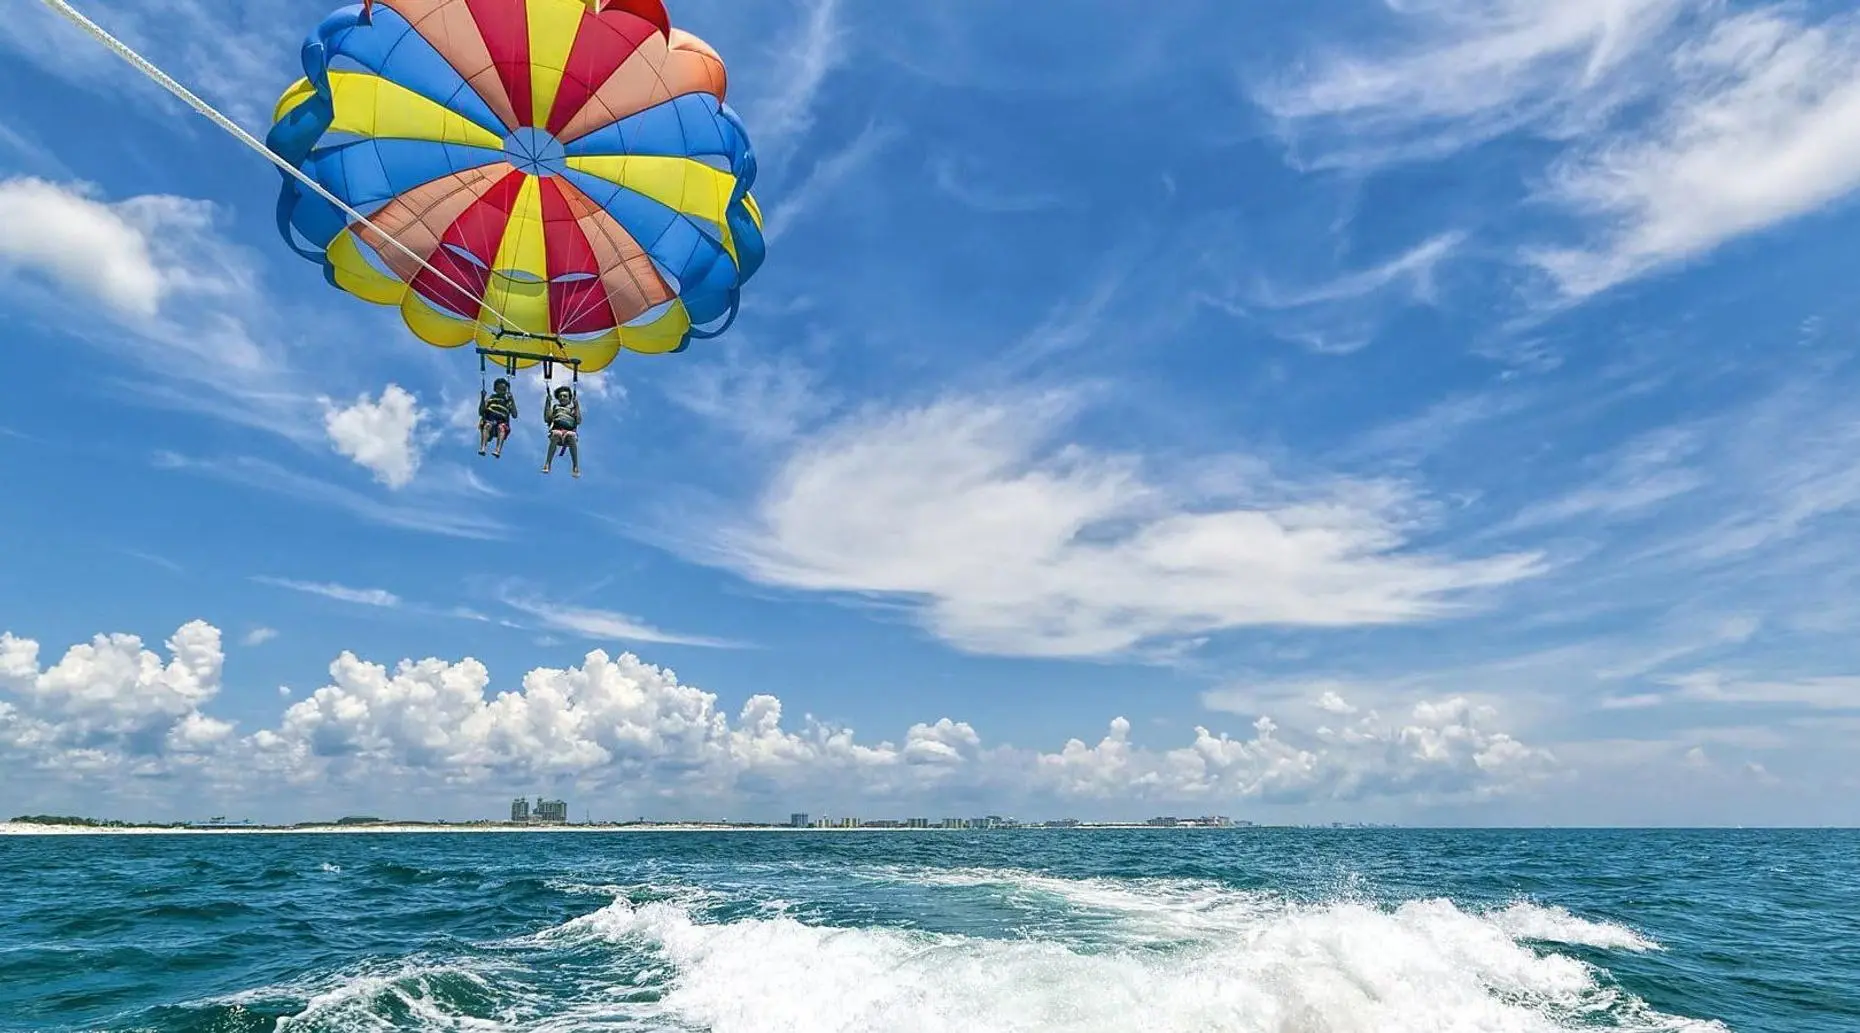 15-Minute Parasailing Experience by Sea Bird